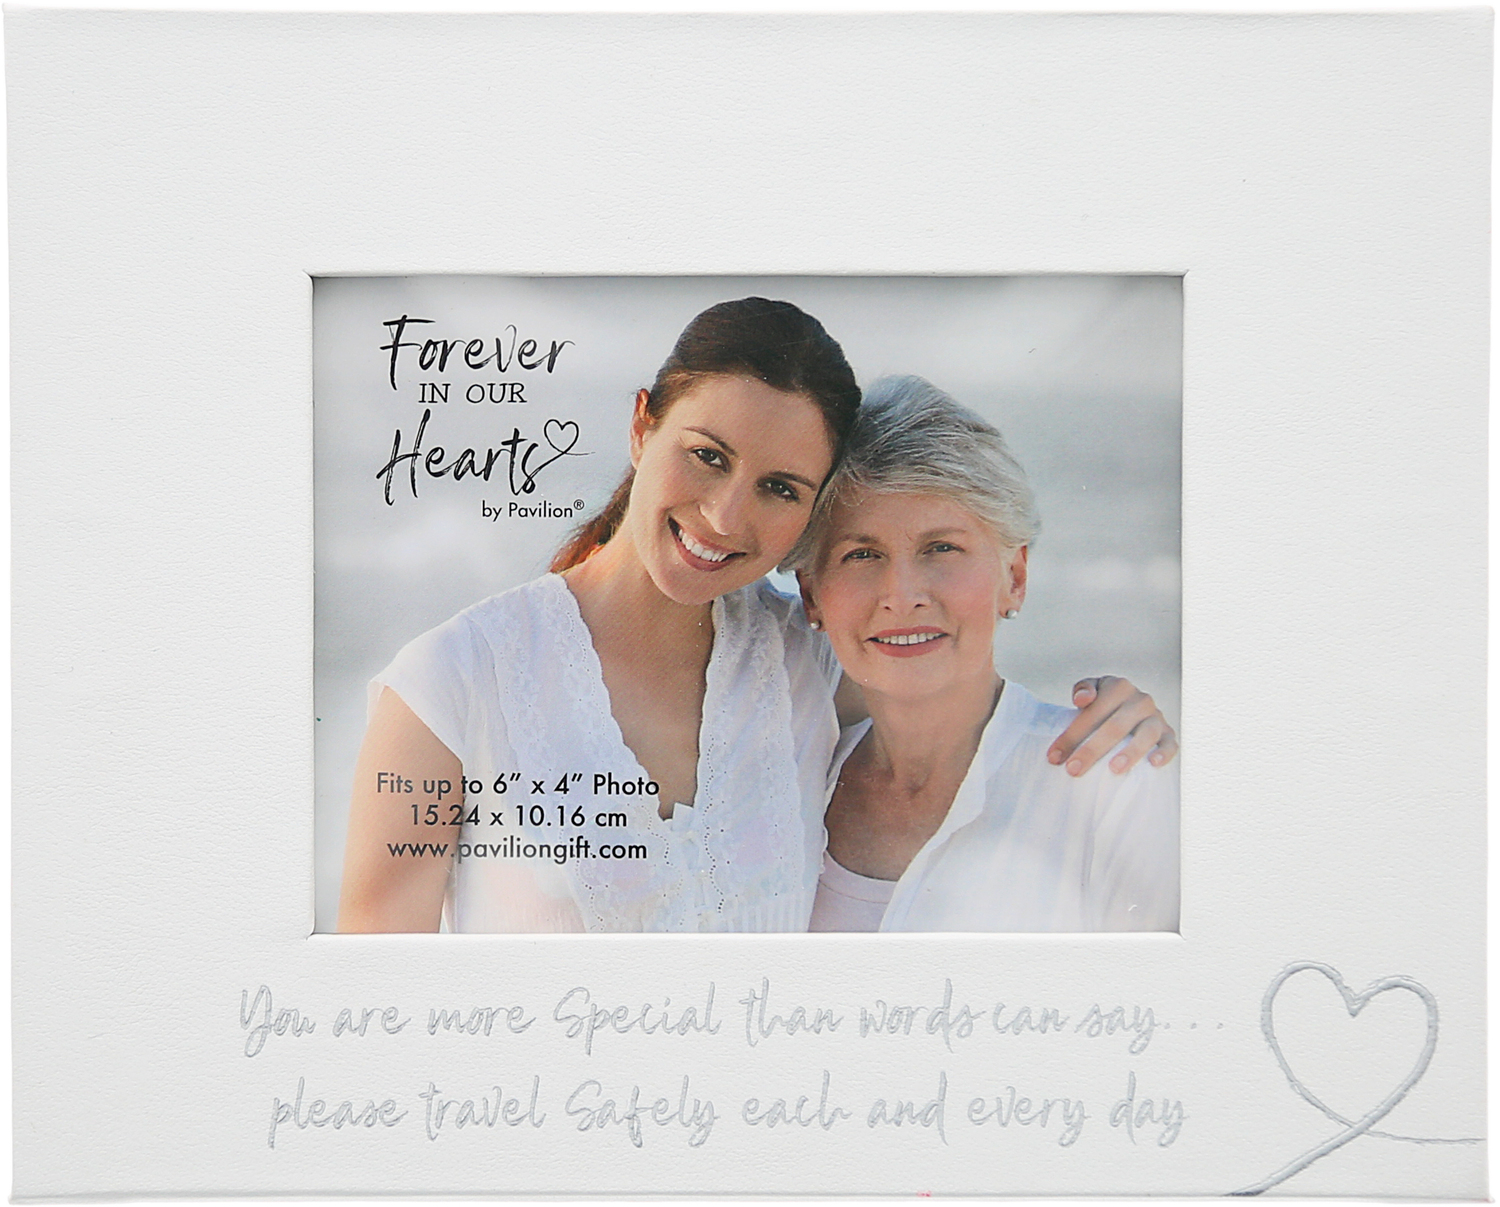 Travel Safely by Forever in our Hearts - Travel Safely - Visor Memorial Photo Frame (Holds 6" x 4" Photo)